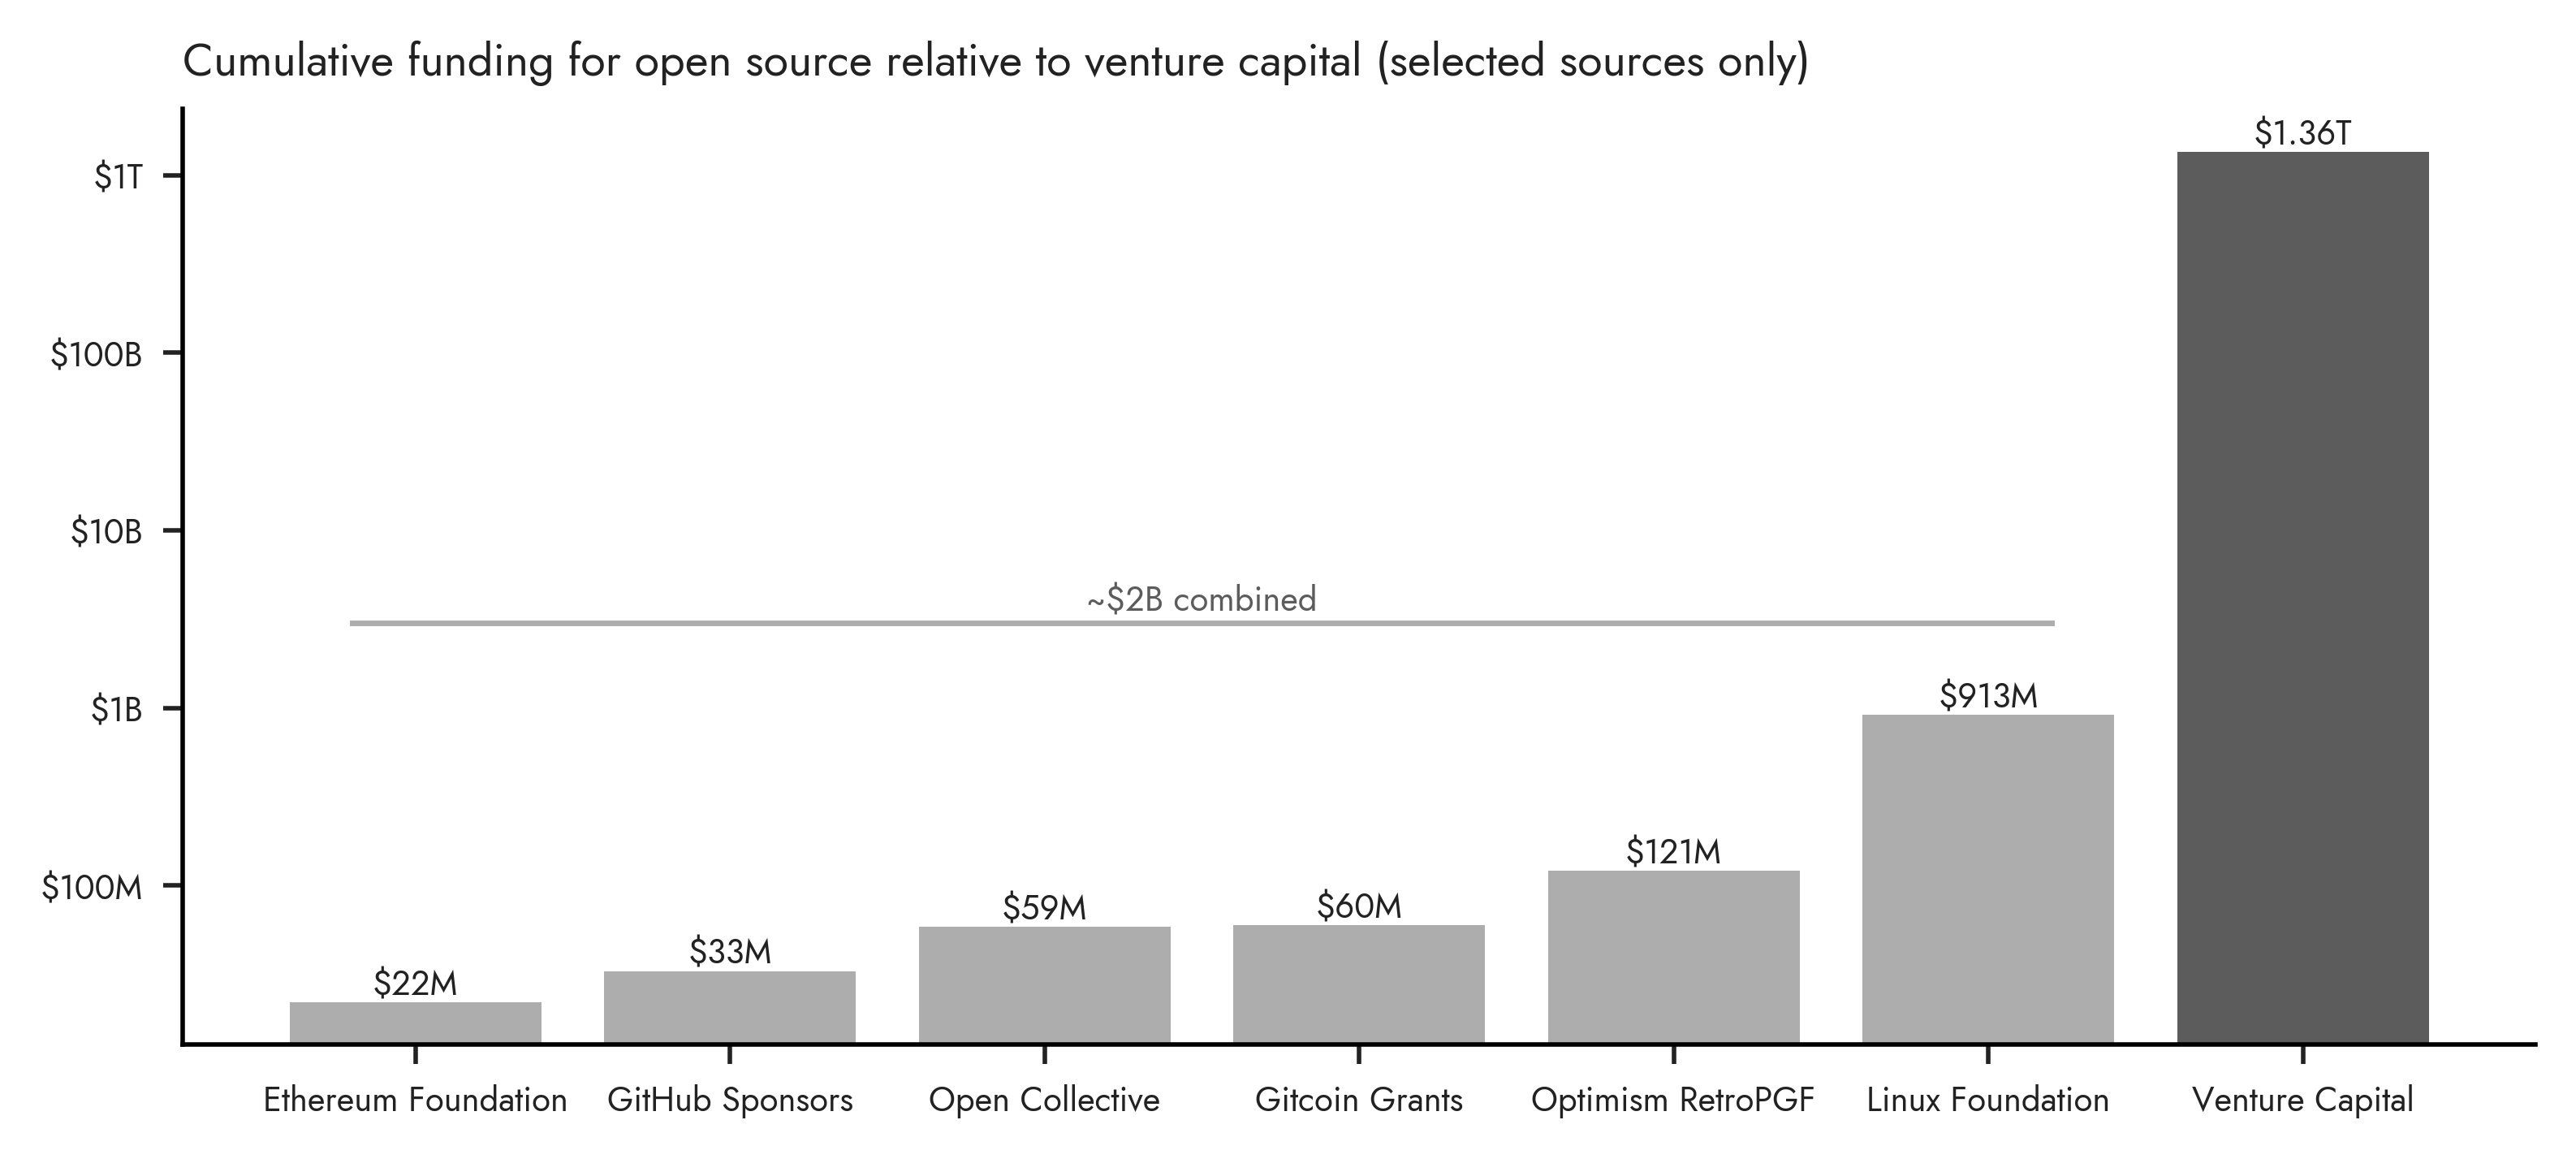 Figure compares cumulative historical funding of OSS projects v. venture capital, illustrating that the latter is roughly 3 orders of magnitude larger.